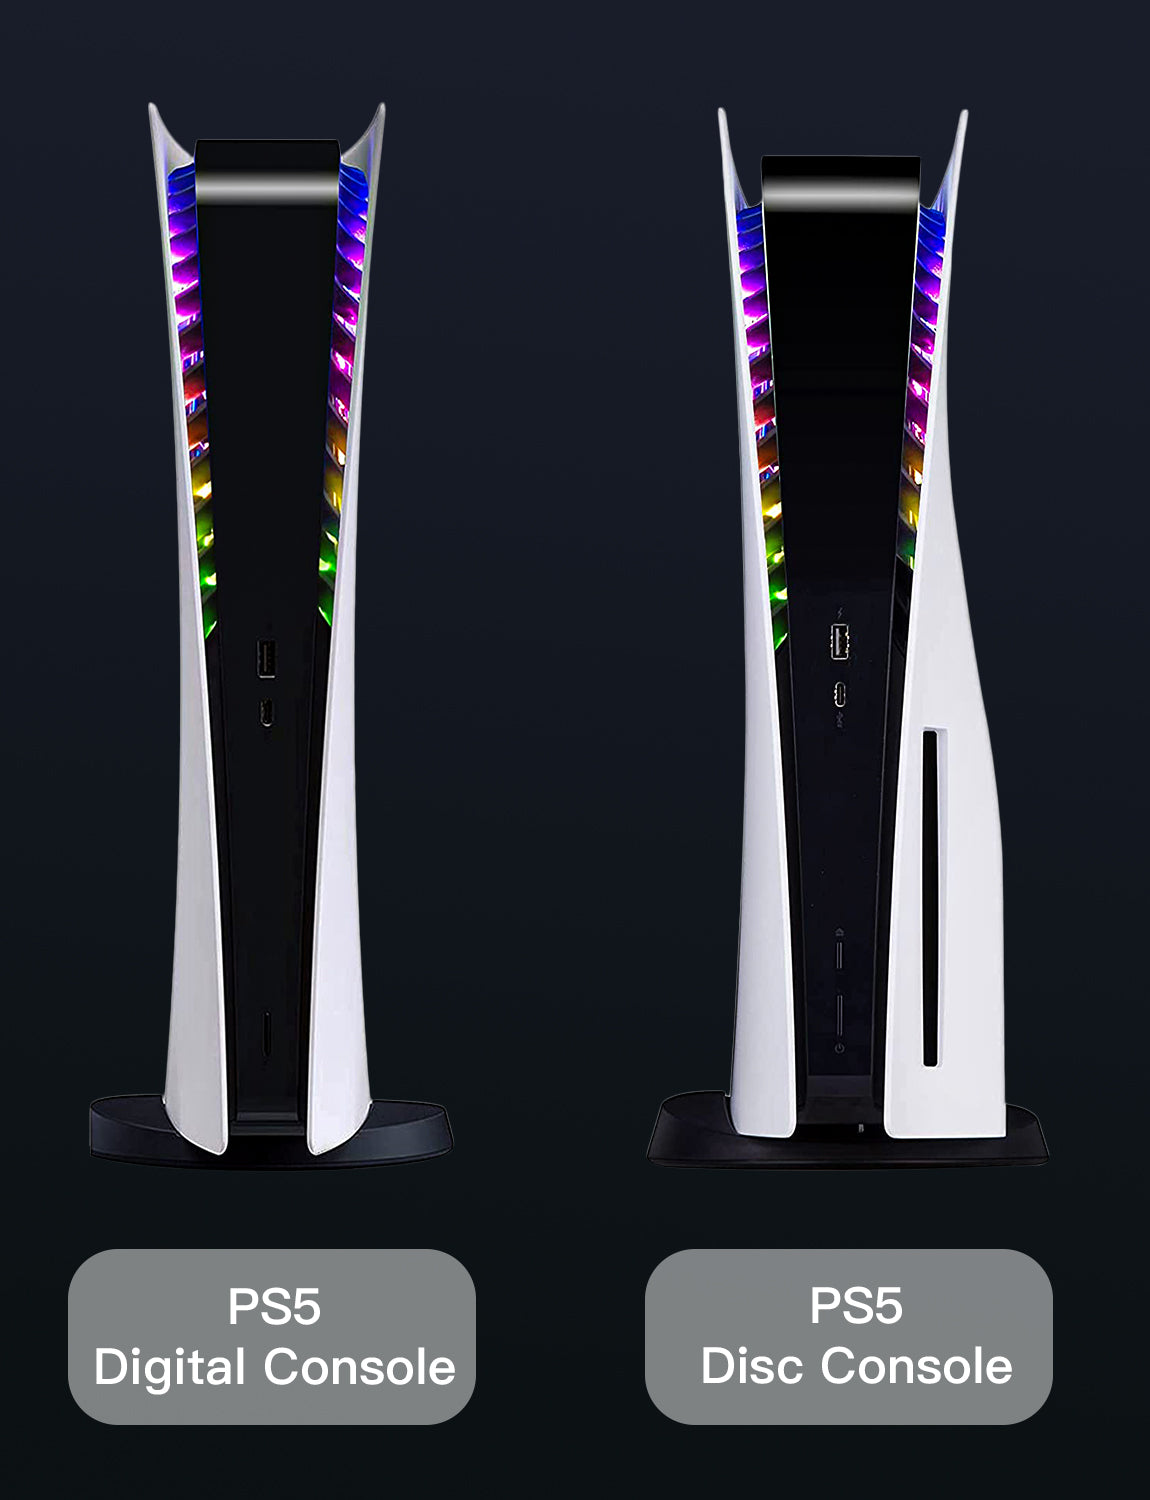 1 PS5 Digital Console and 1 PS5 Disc Console, both featuring LED lights.